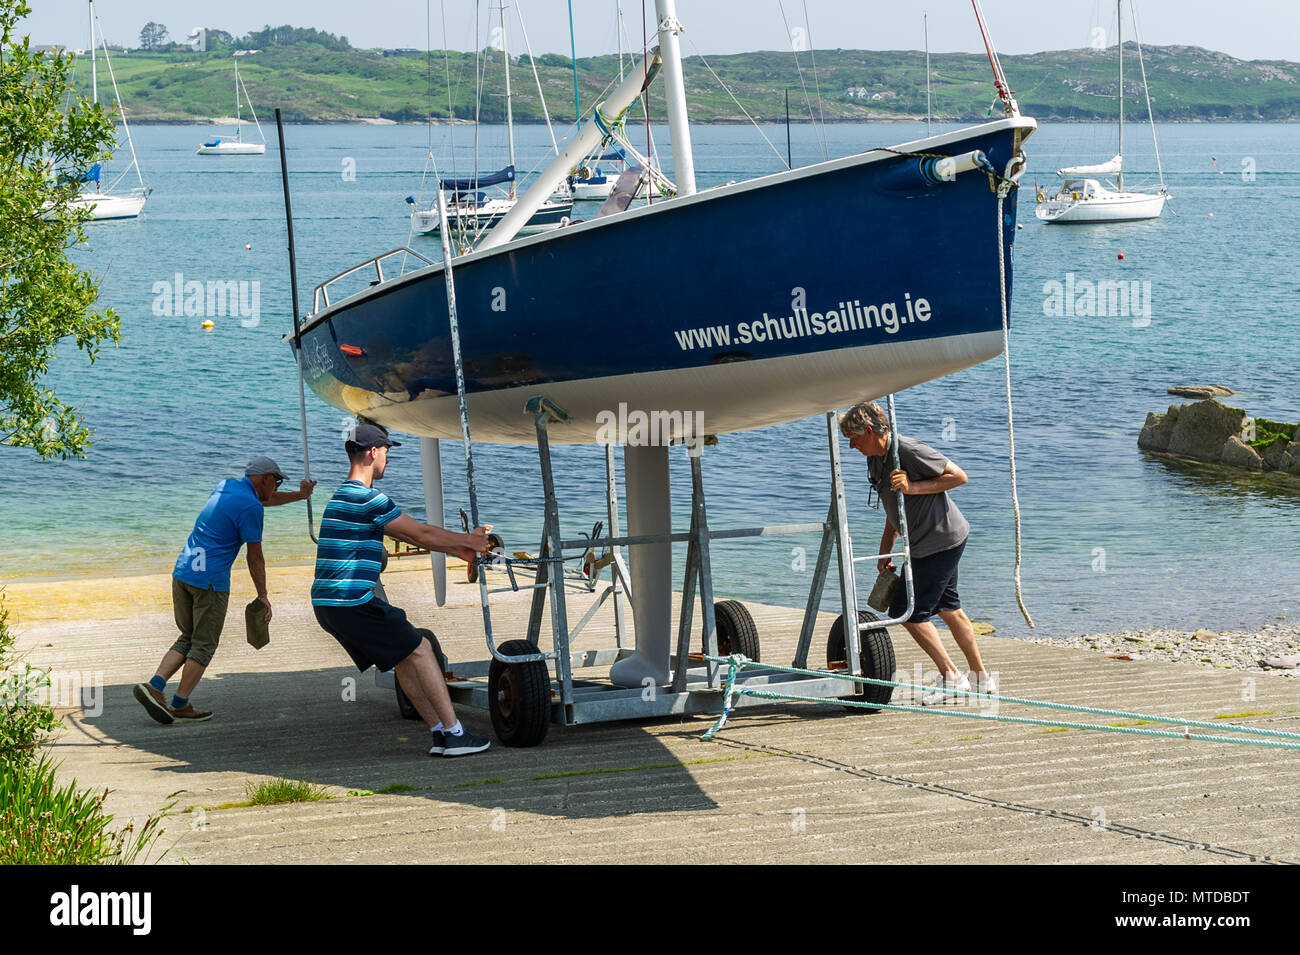 Schull, Ireland. 29th May, 2018.  On the hottest day of the year in West Cork, members of Schull Sailing Club launch a yacht into Schull Harbour. Warm sunshine and highs of up to 27 C will give way to heavy showers and possible thunderstorms later in the day. Credit: Andy Gibson/Alamy Live News. Stock Photo